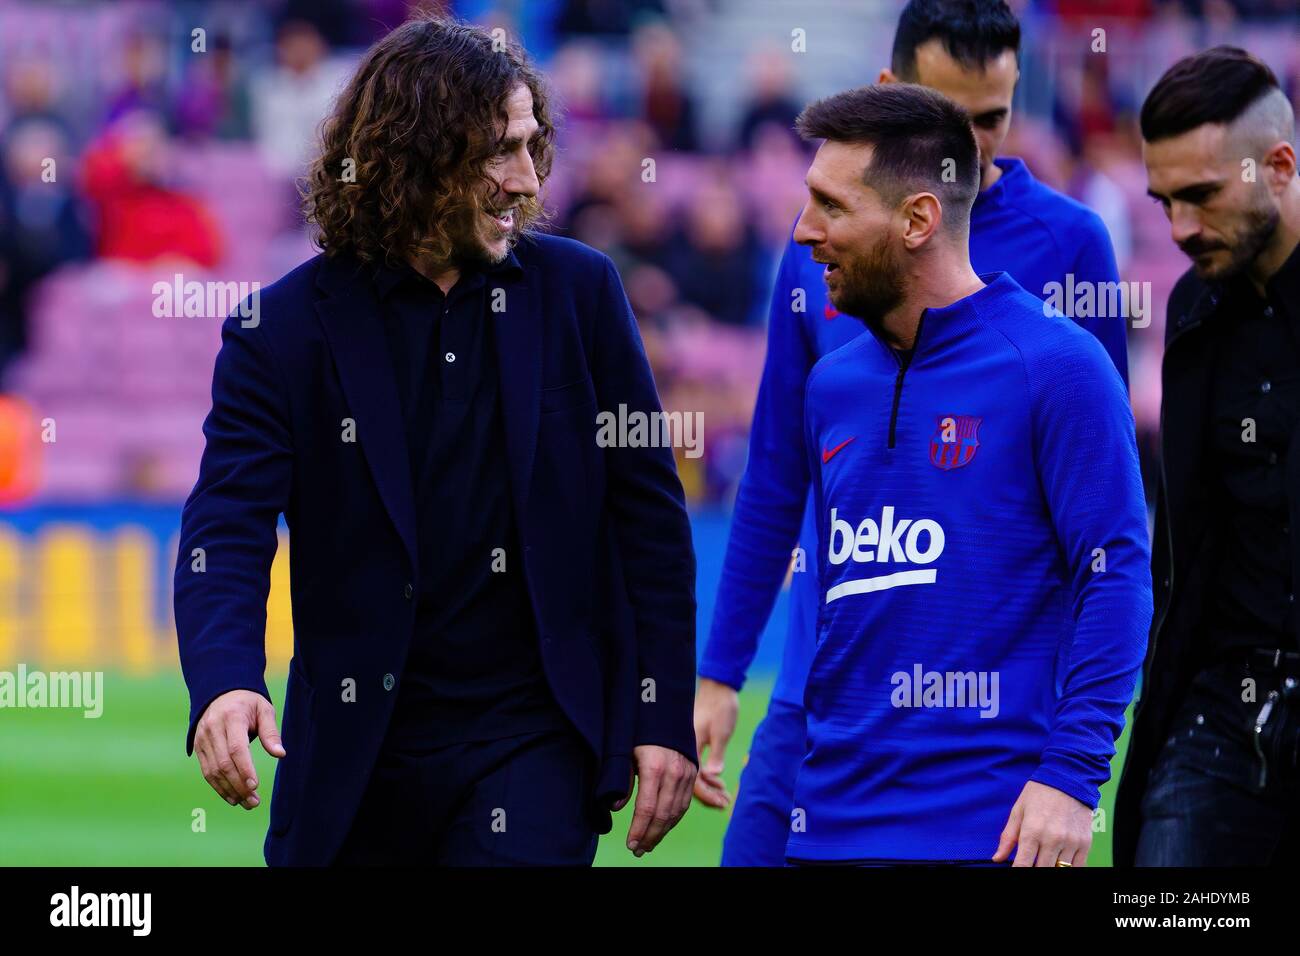 BARCELONA - DEC 21: Carles Puyol (L) and Messi (R) prior to the La Liga match between FC Barcelona and Deportivo Alaves at the Camp Nou Stadium on Dec Stock Photo